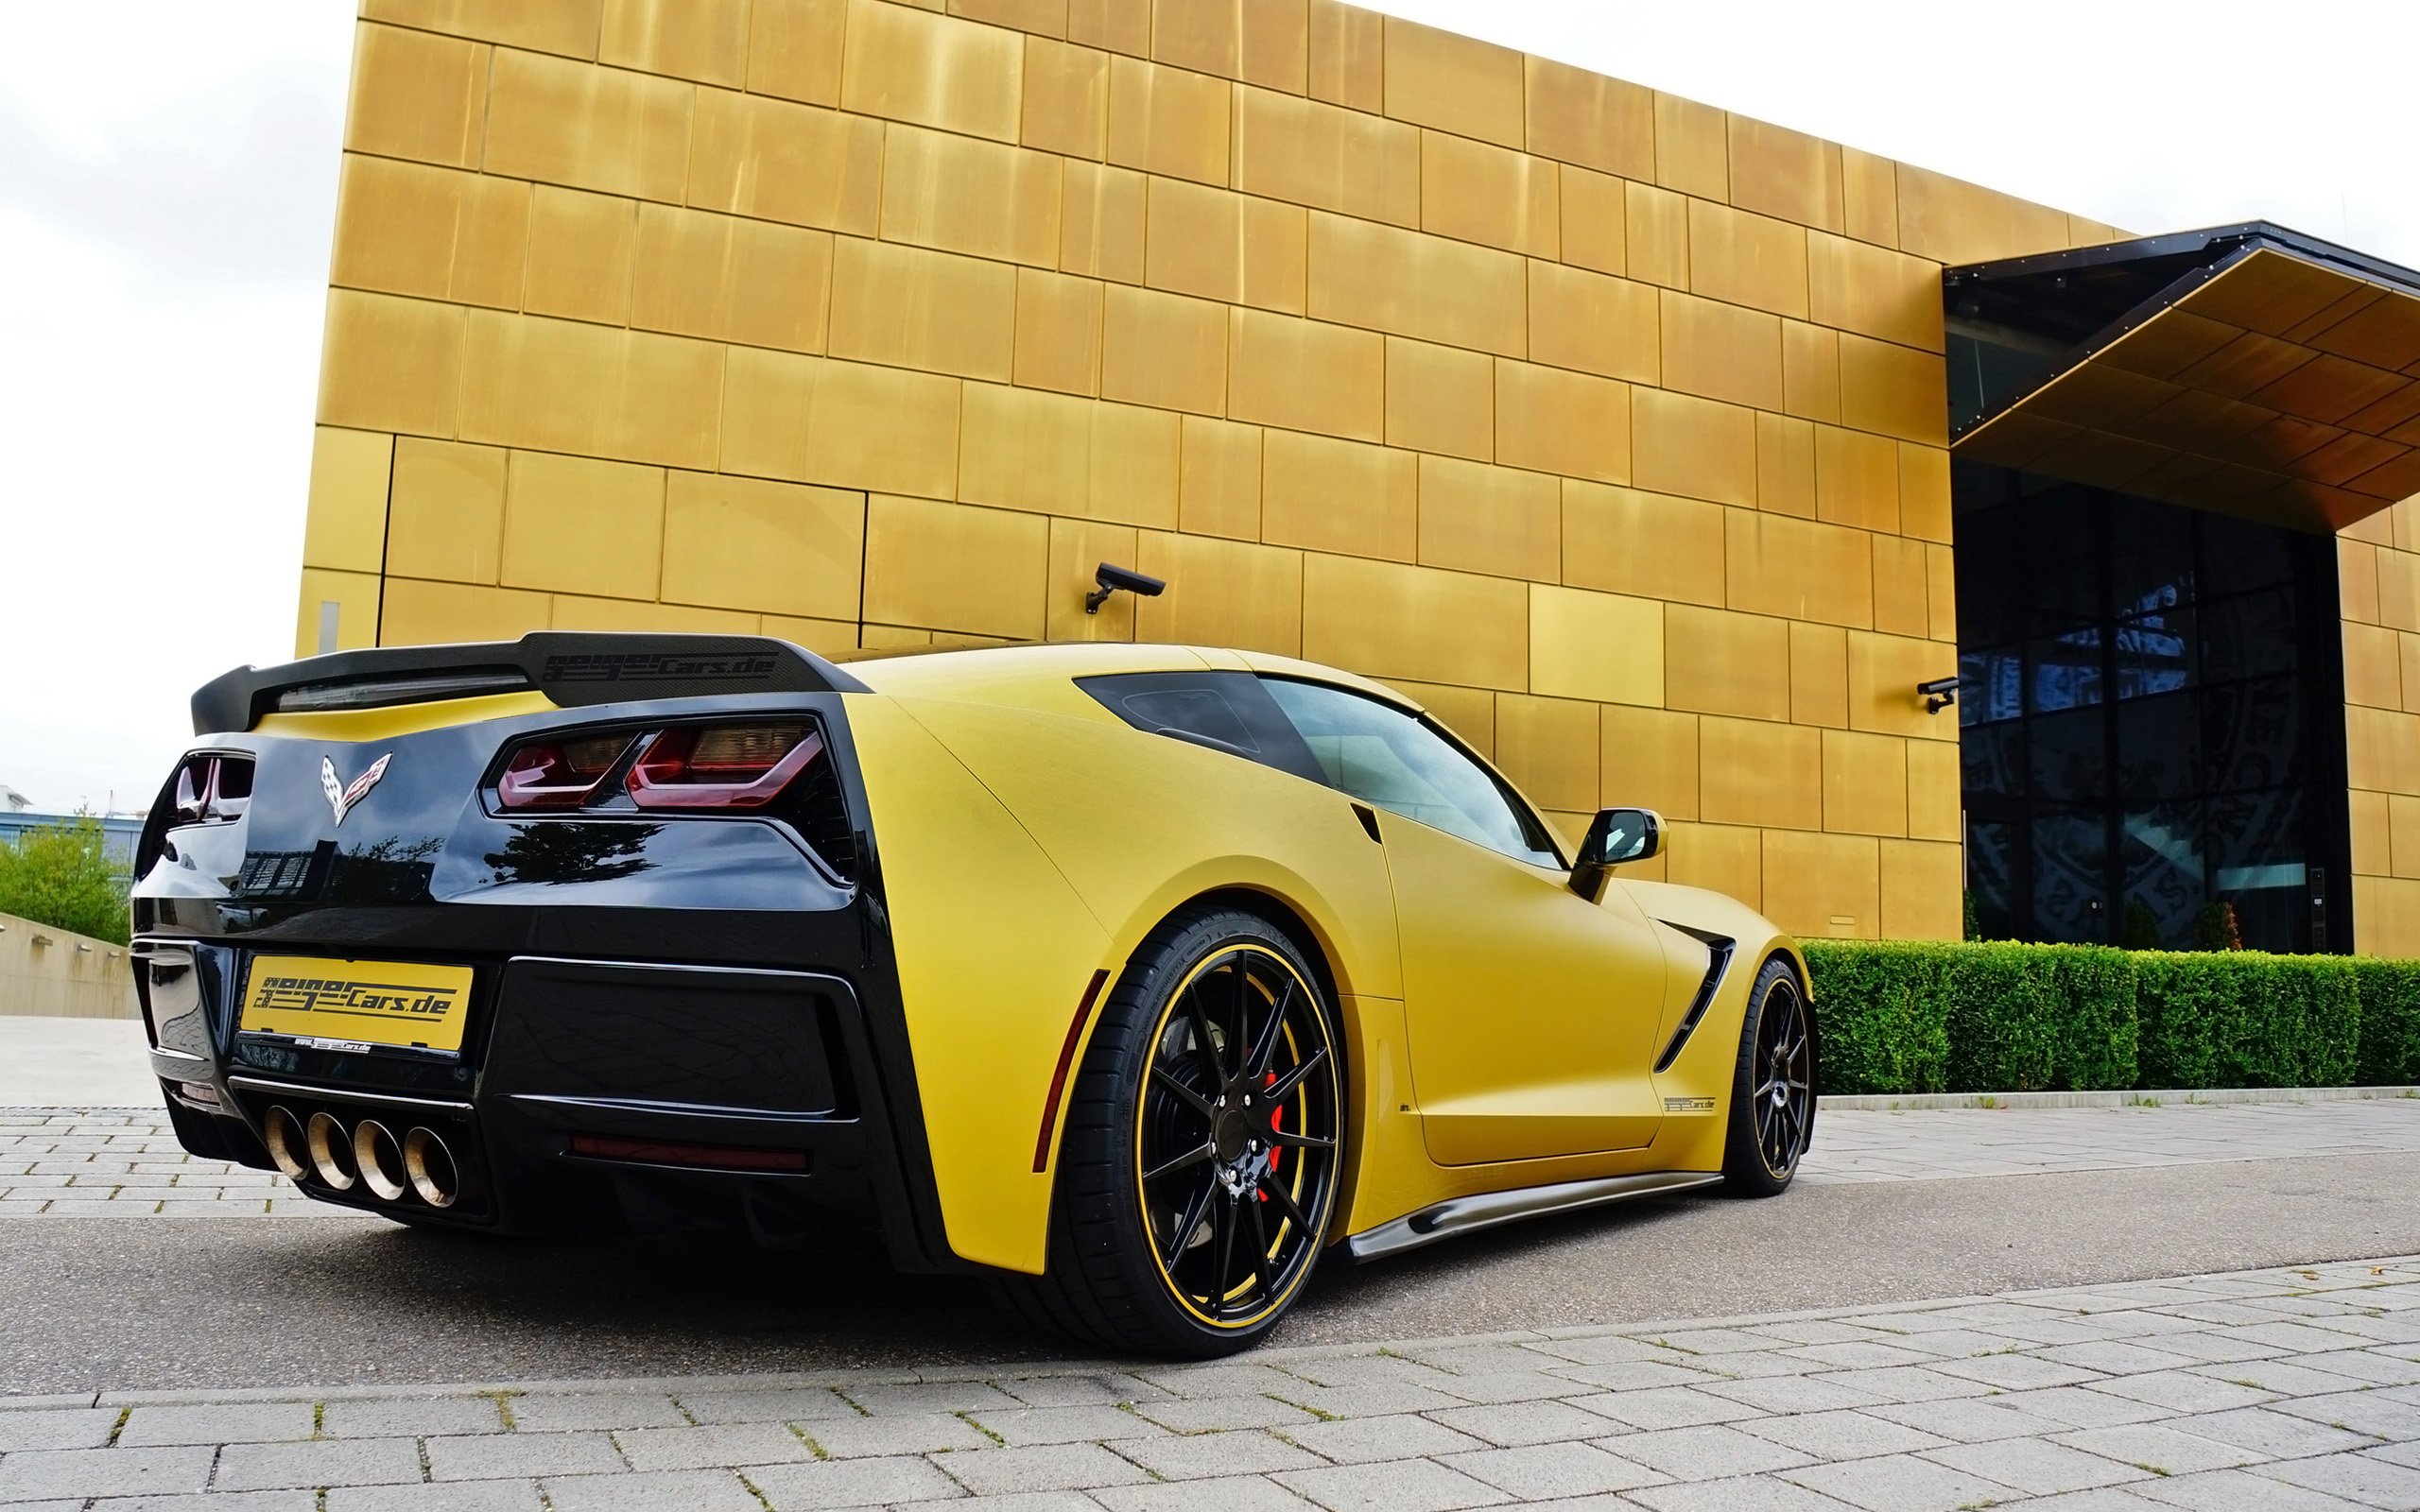 2014, Geigercars, Chevrolet, Corvette, C 7, Stingray, Muscle, Supercar, Tuning Wallpaper